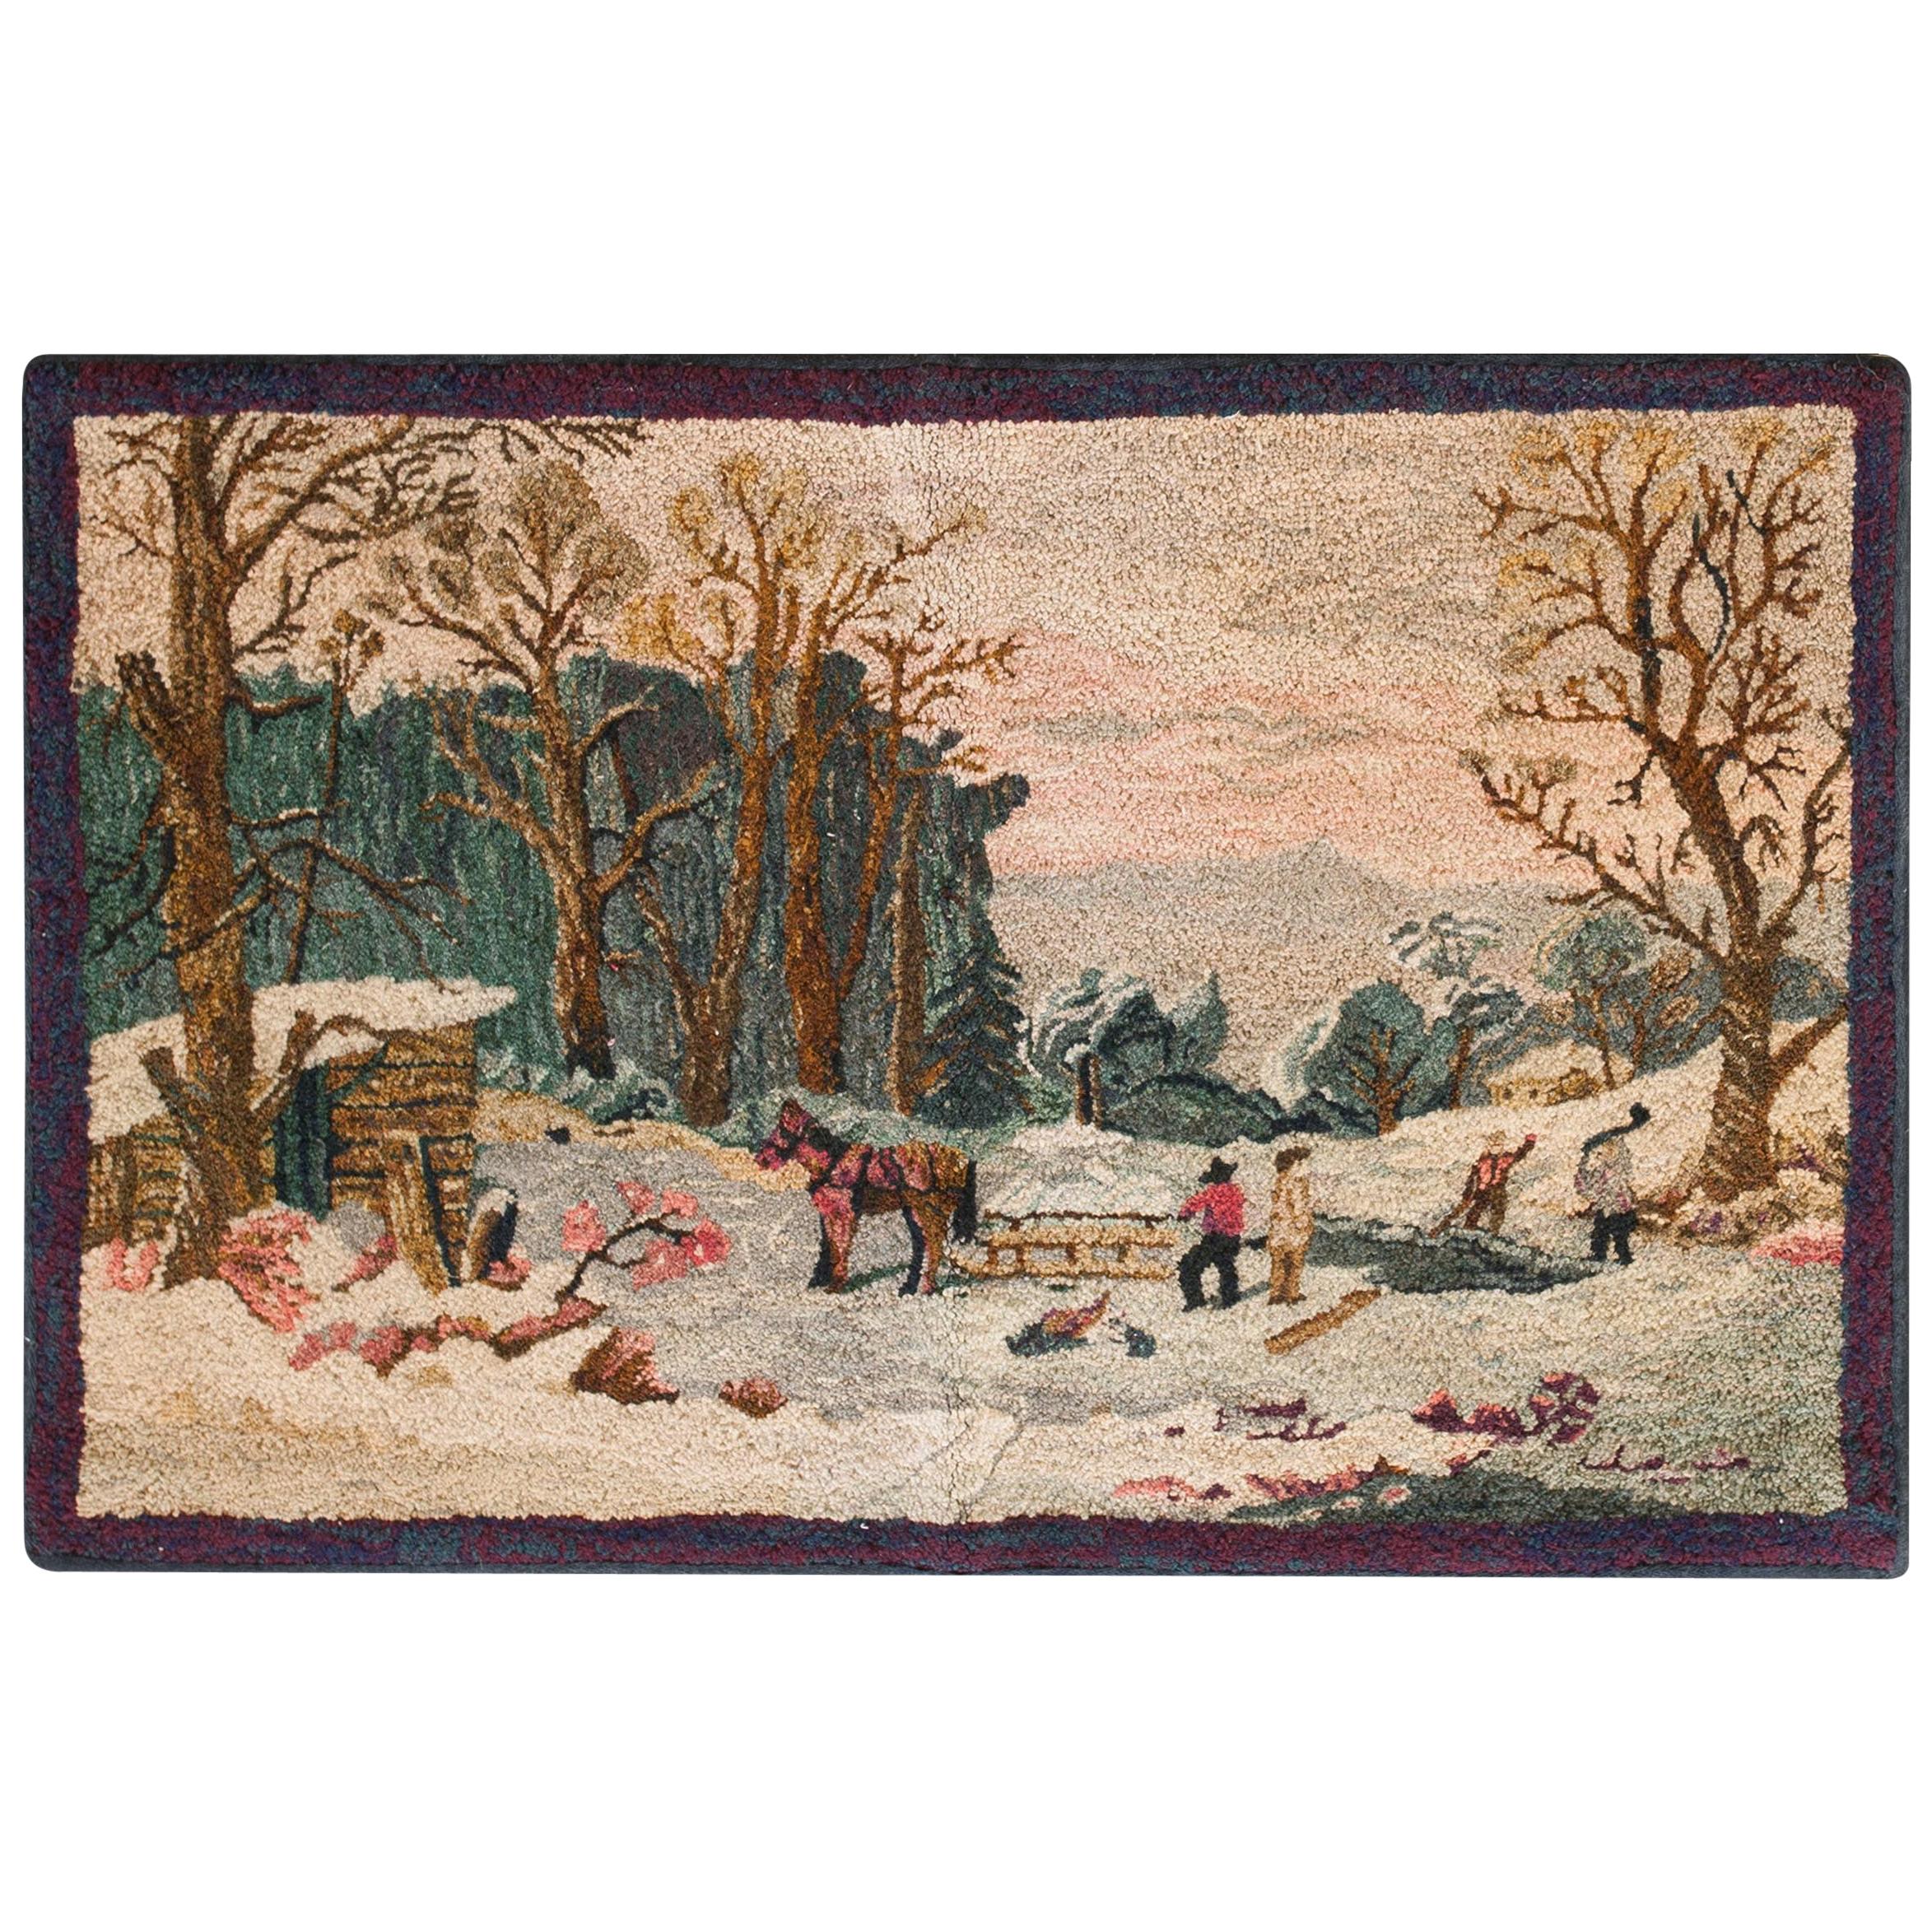 Mid 20th Century Pictorial American Hooked Rug (  1'10" x 2'10" - 56 x 86 )